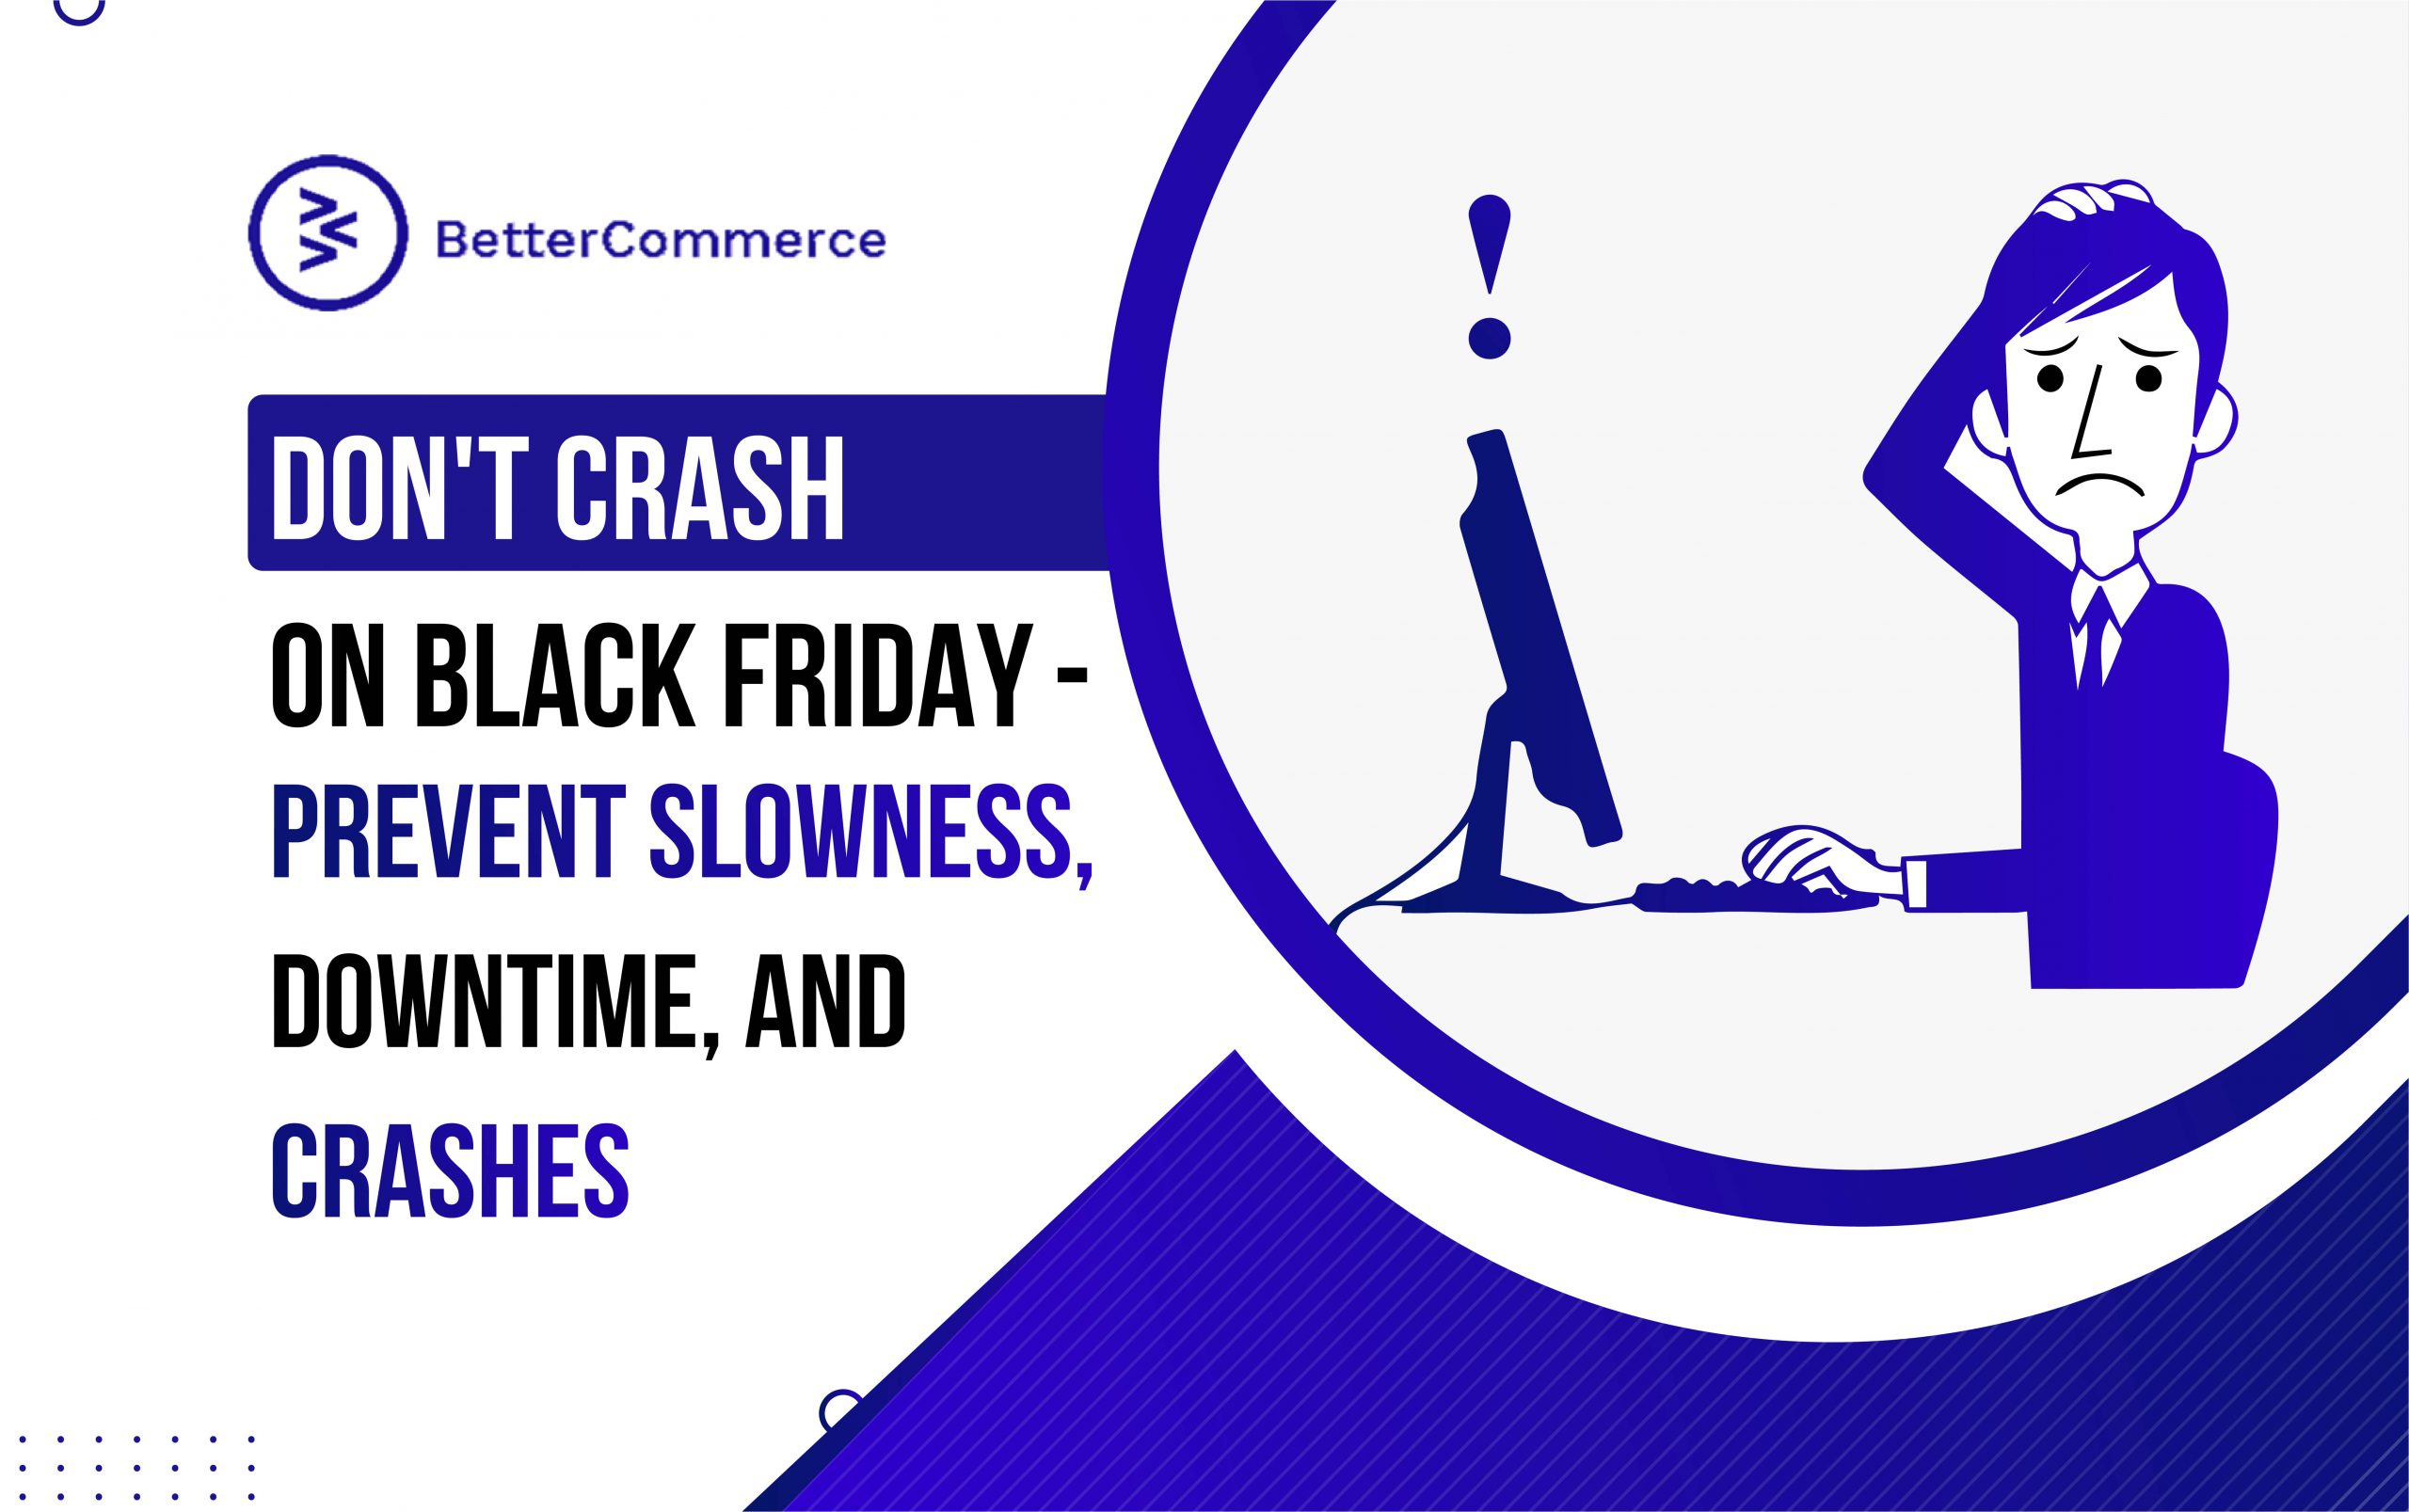 Don’t Crash on Black Friday – Prevent Slowness, Downtime, and Crashes